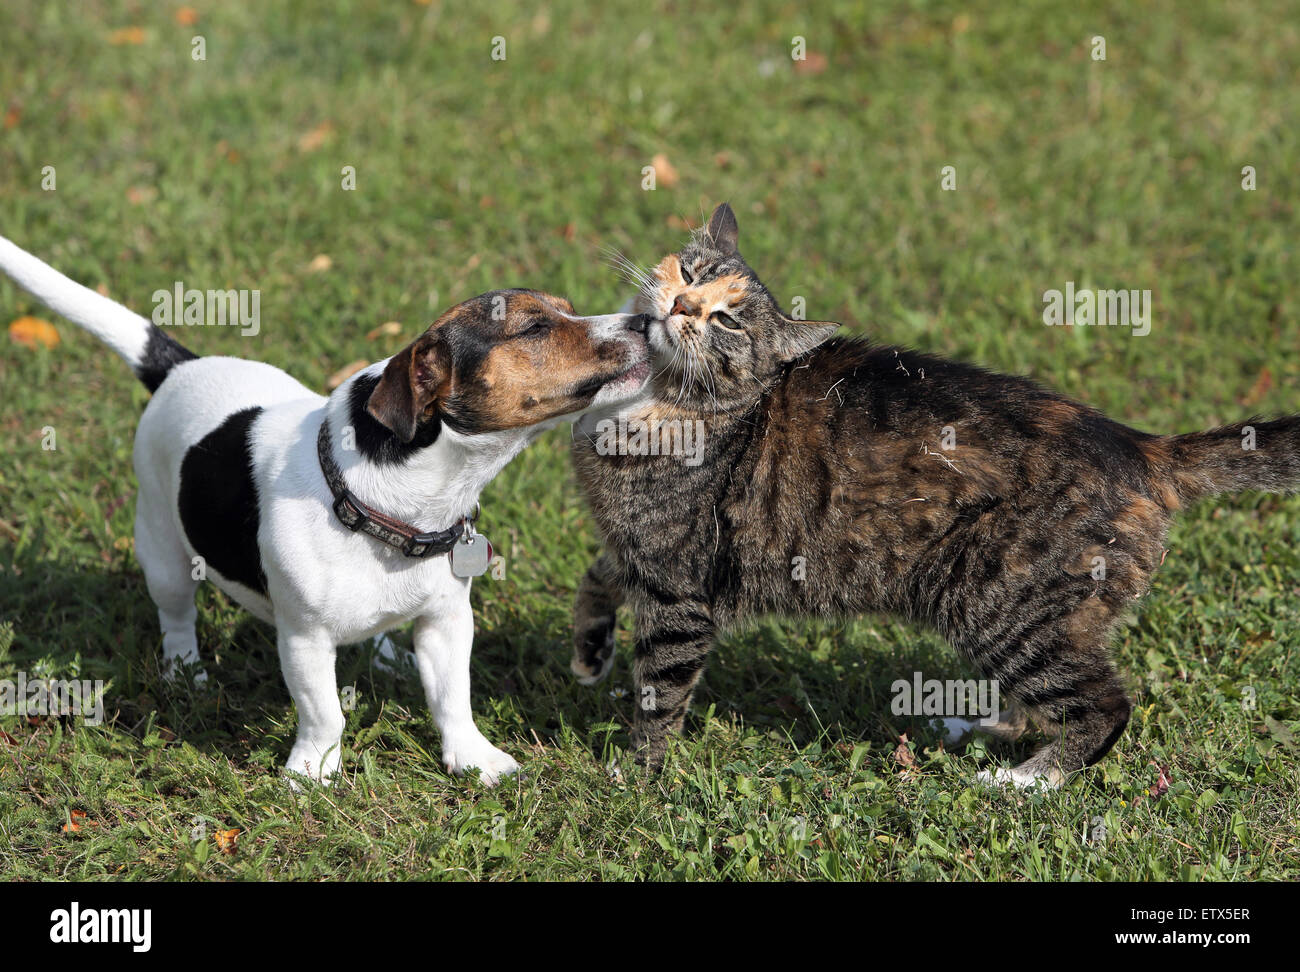 Görlsdorf, Germany, Jack Russell Terrier licking from a domestic cat Stock Photo